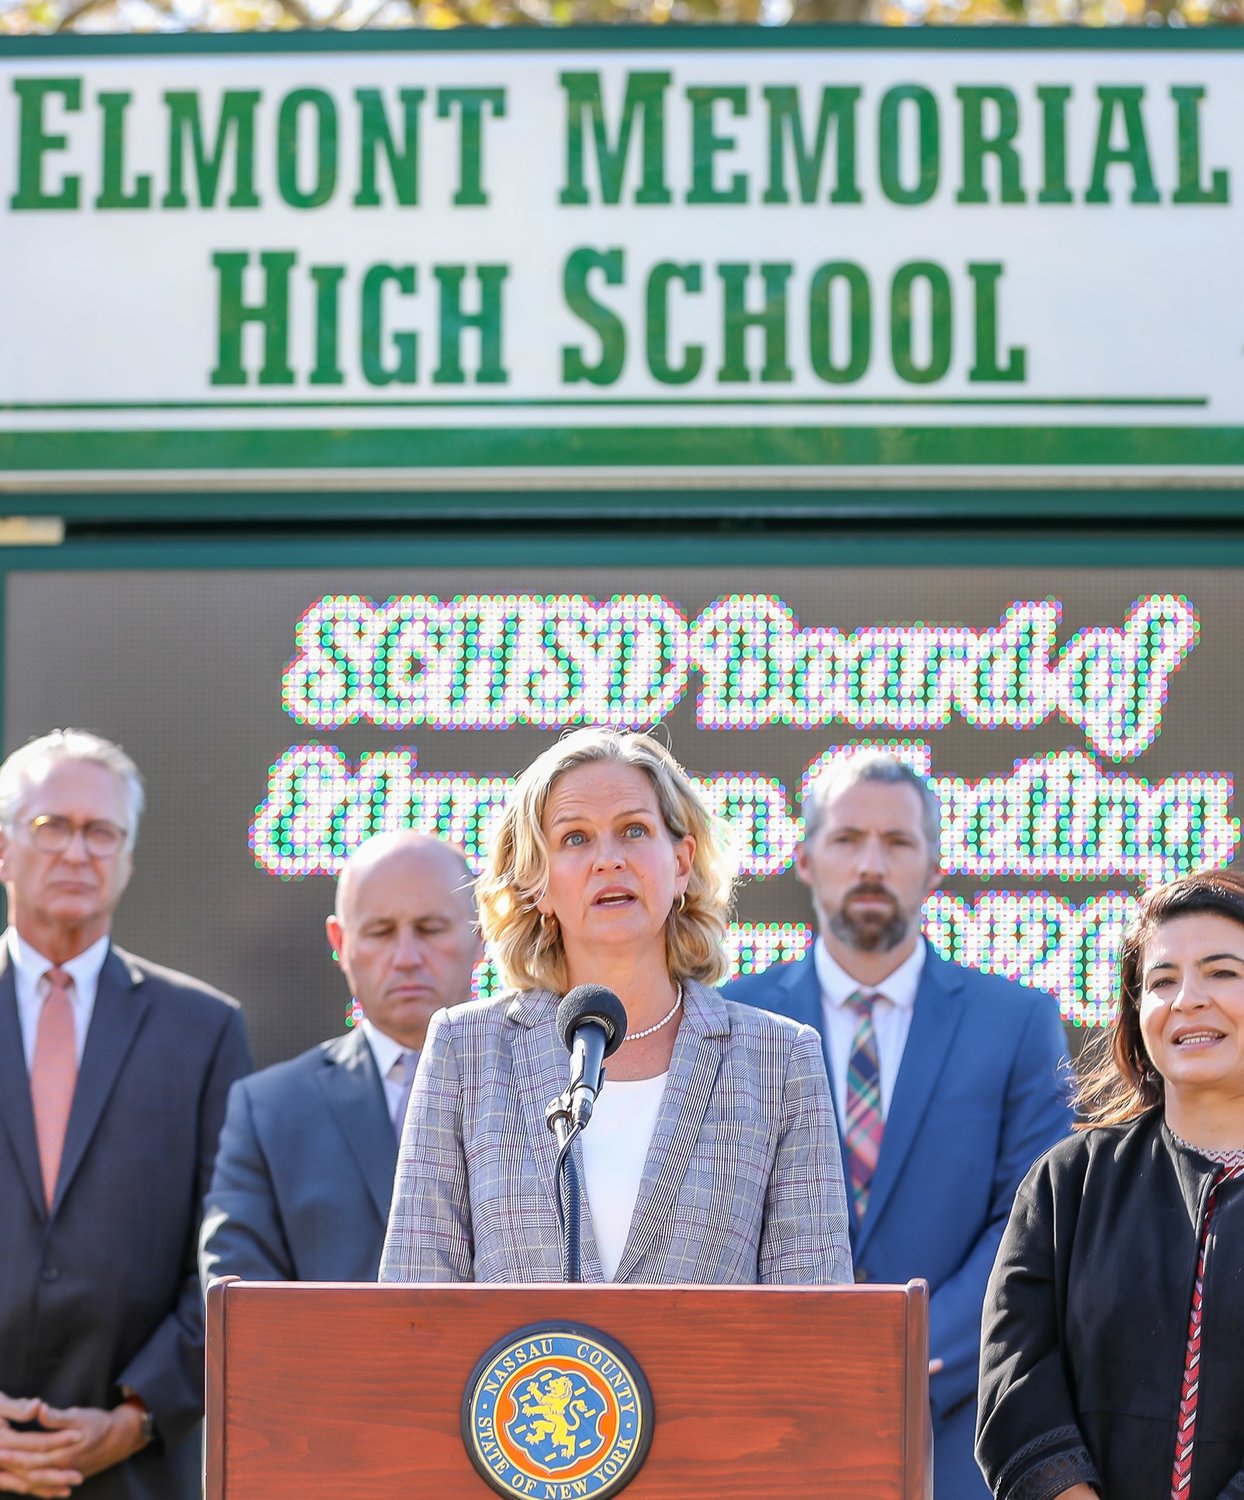 The program’s expansion was announced on Oct. 21 at Elmont Memorial High School.